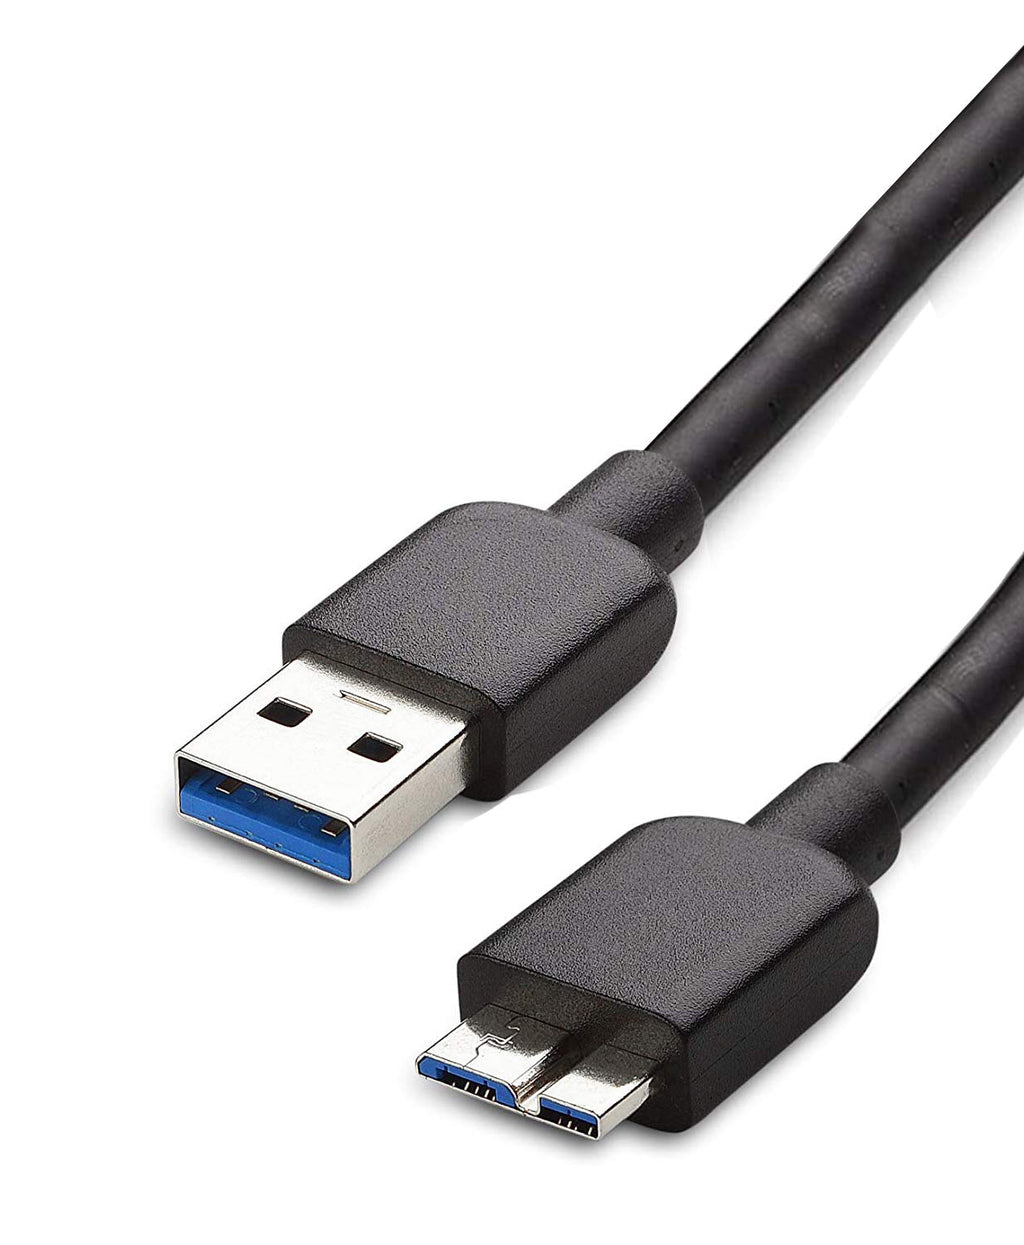  [AUSTRALIA] - USB 3.0 Cable A to Micro B high Speed Upto 5 Gbps Data Transfer Cable Compatible for Buffalo MiniStation External Hard Drive